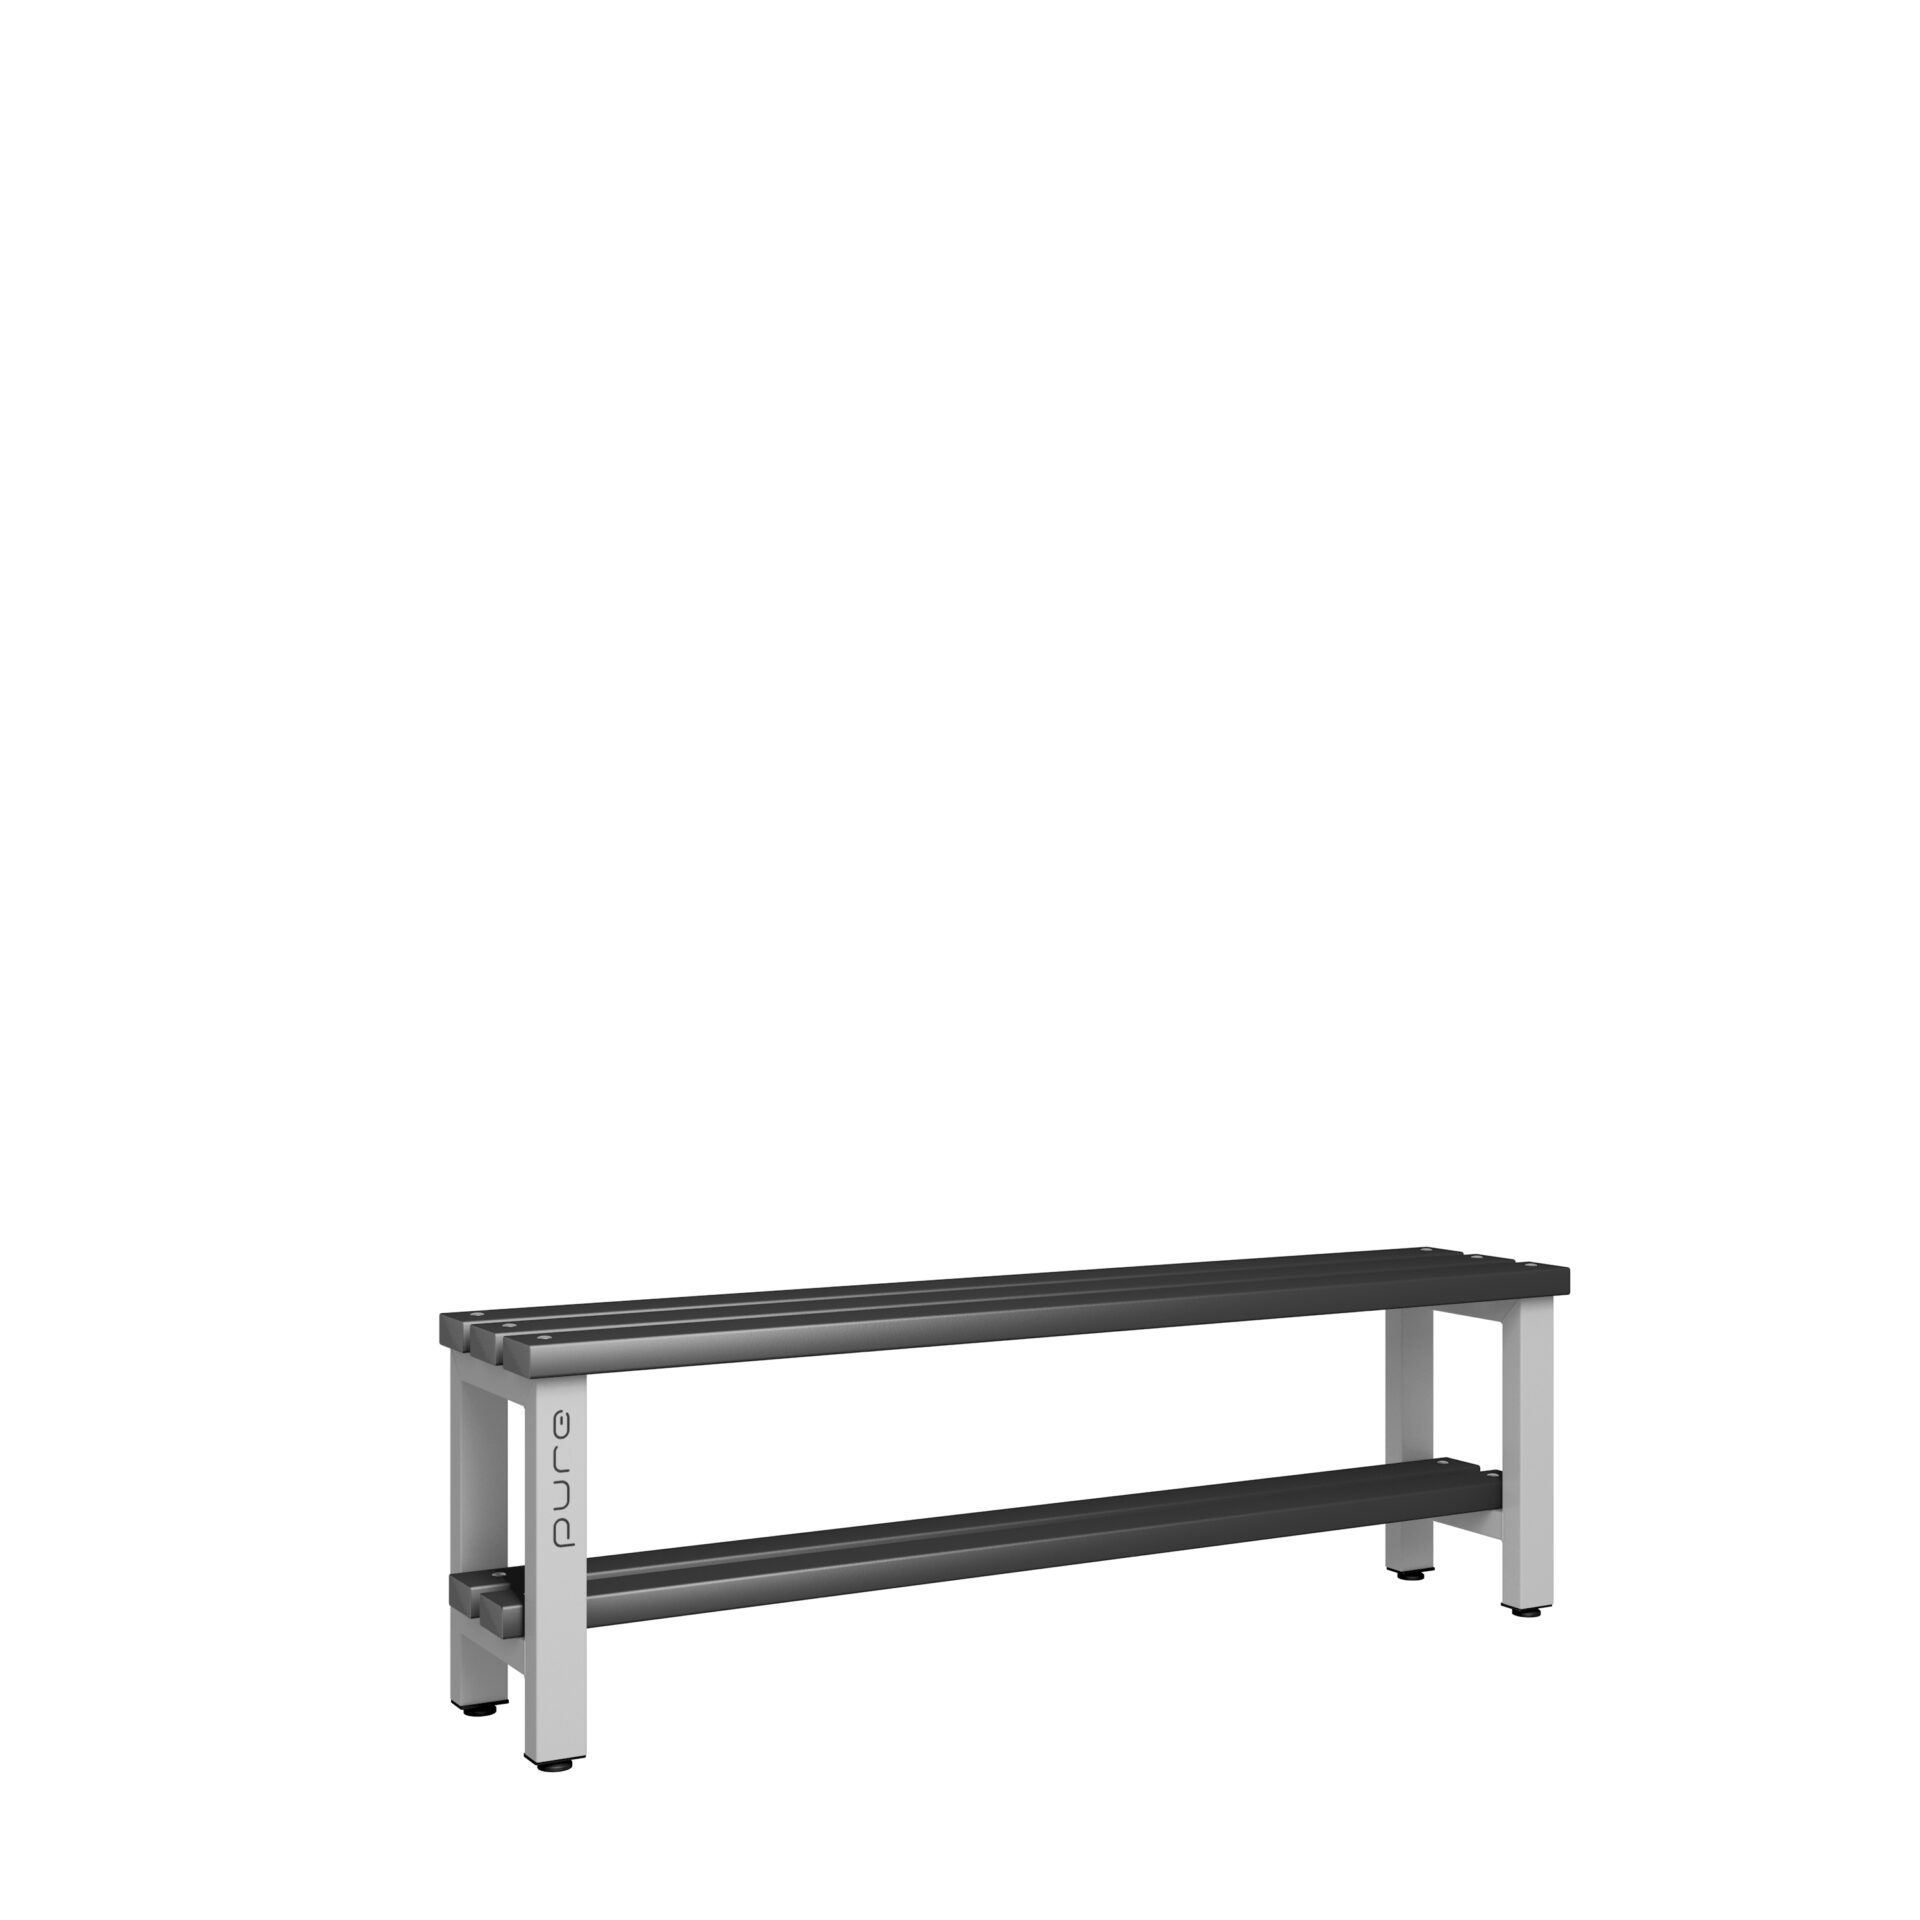 Pure Carbon Zero Single Sided 1500mm Standard Bench With Shoe Shelf - Pearl Silver / Black Polymer